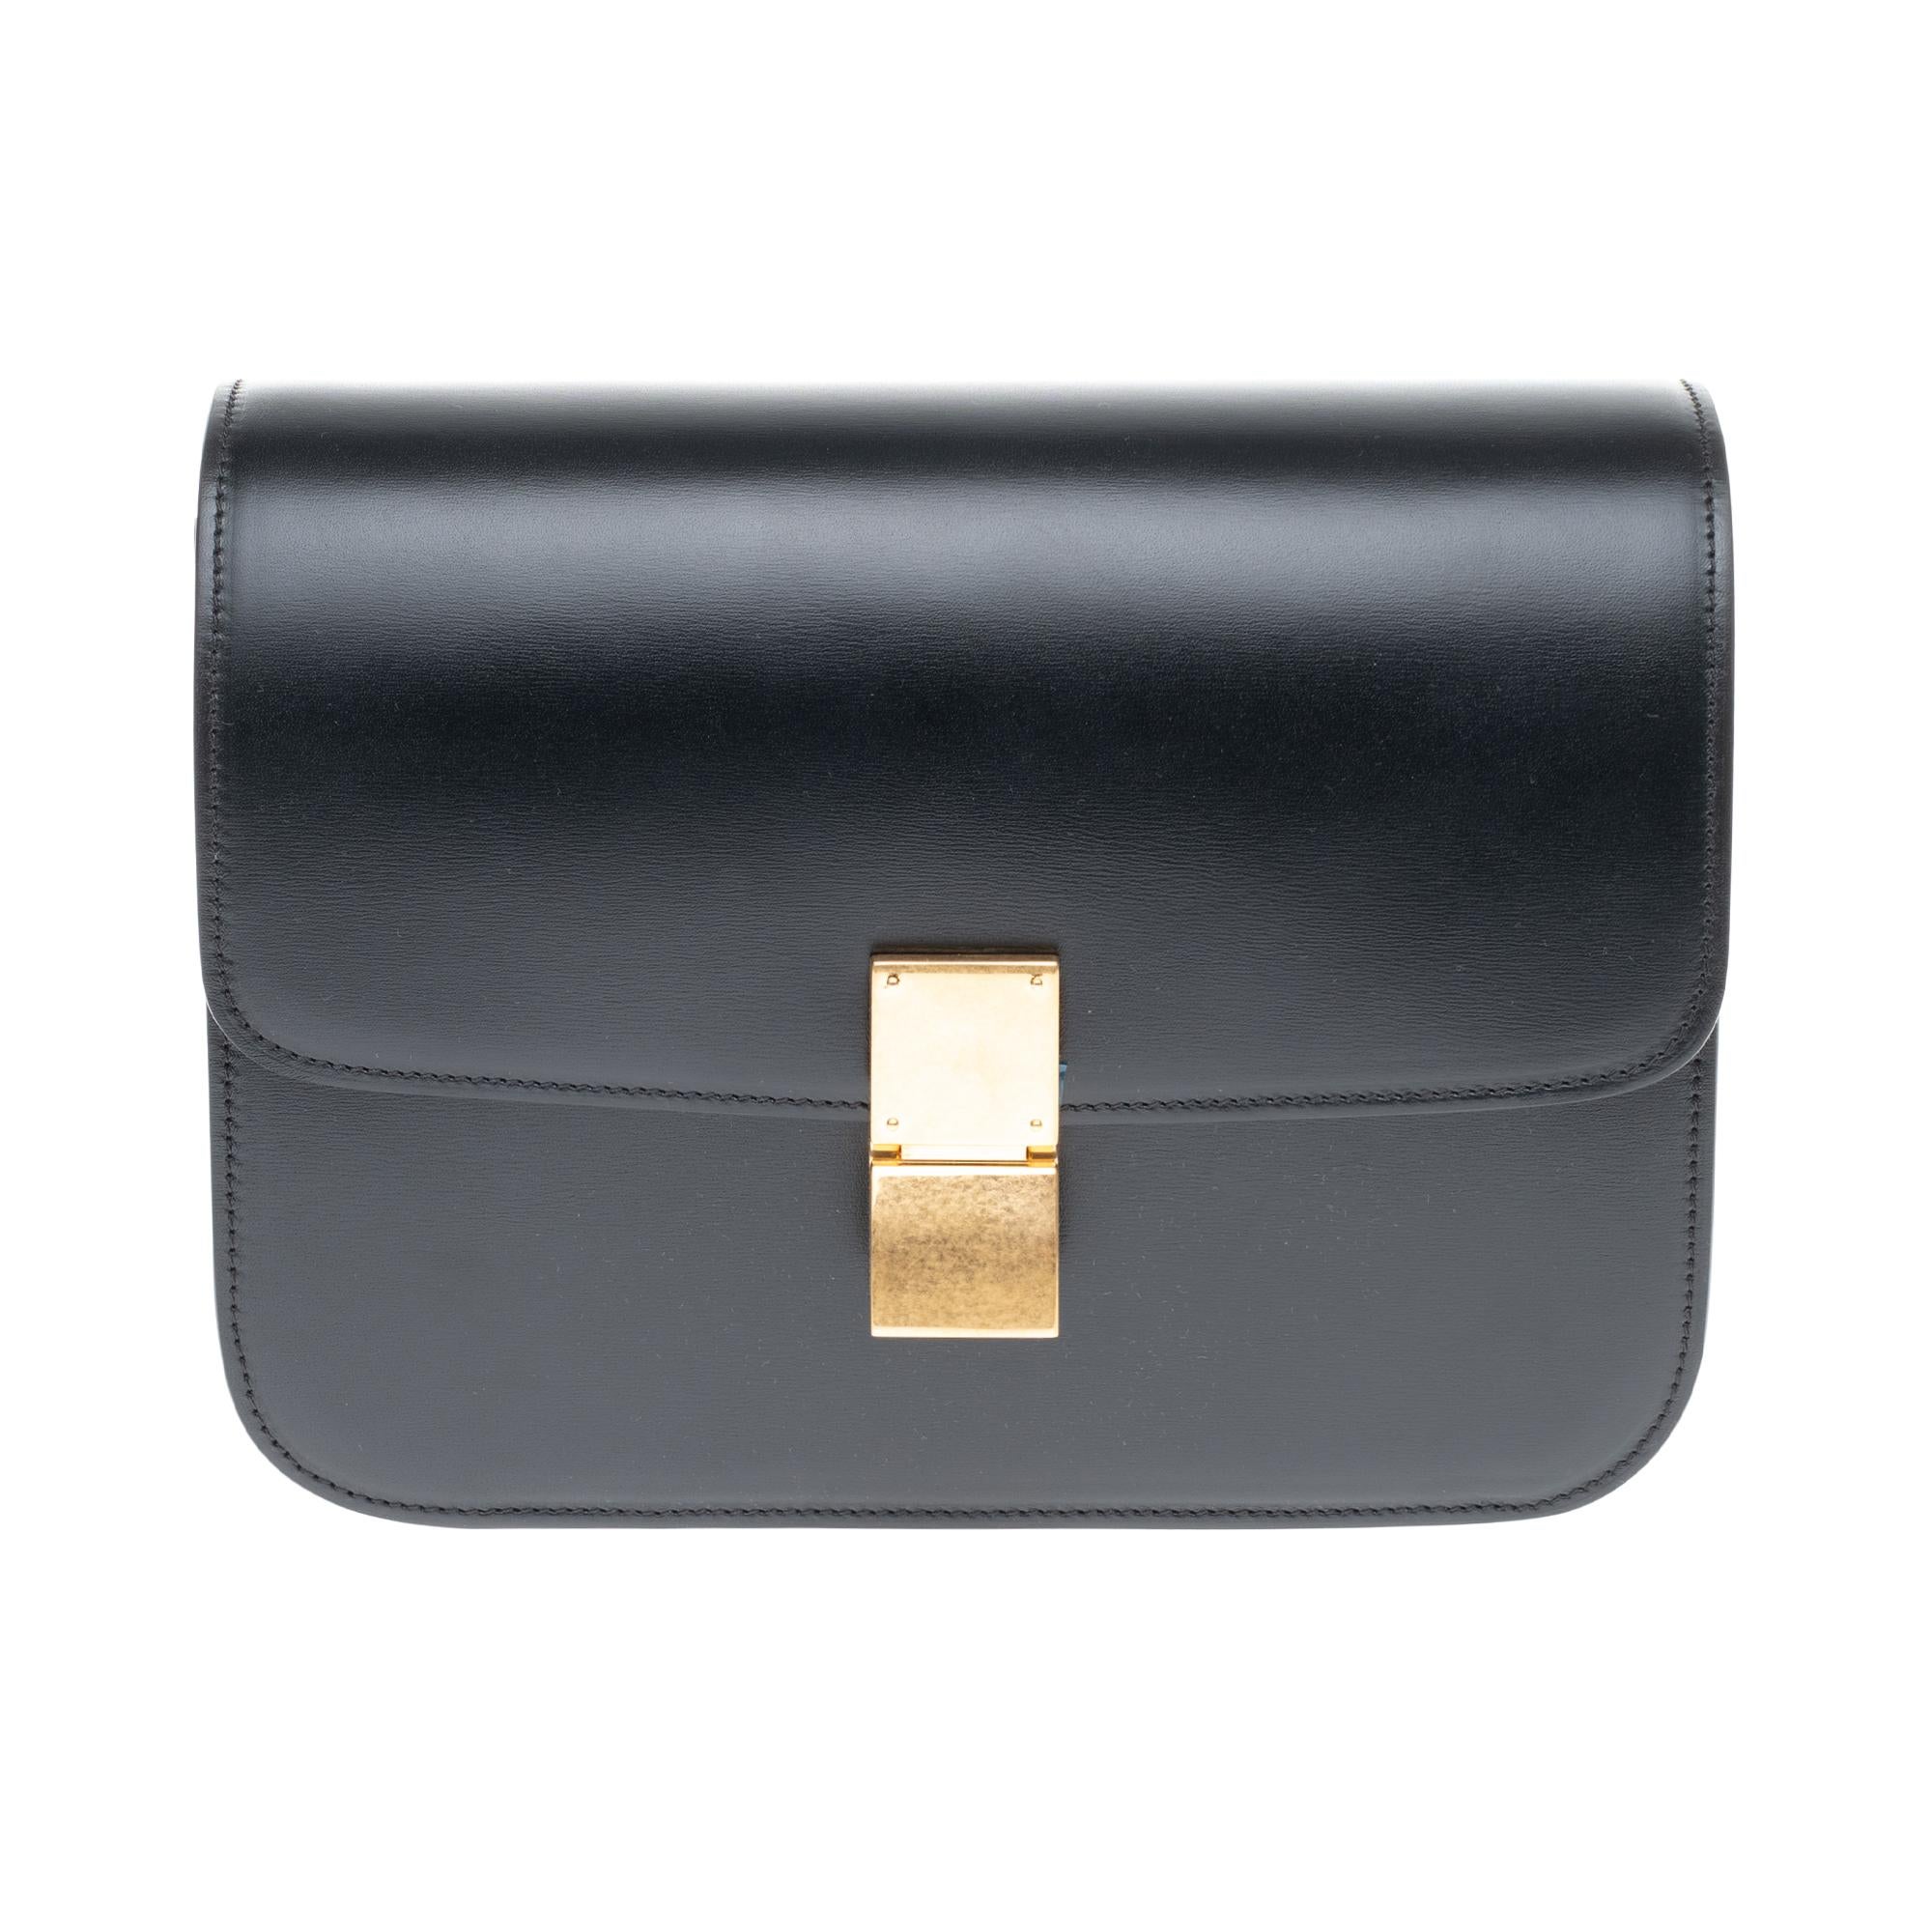 Chic Celine Classic Box shoulder bag in black calfskin leather , gold metal trim, a handle transformable in black leather allowing a hand carry, shoulder or shoulder strap.
* 45 cm adjustable and removable leather shoulder strap
* Brass closure
*